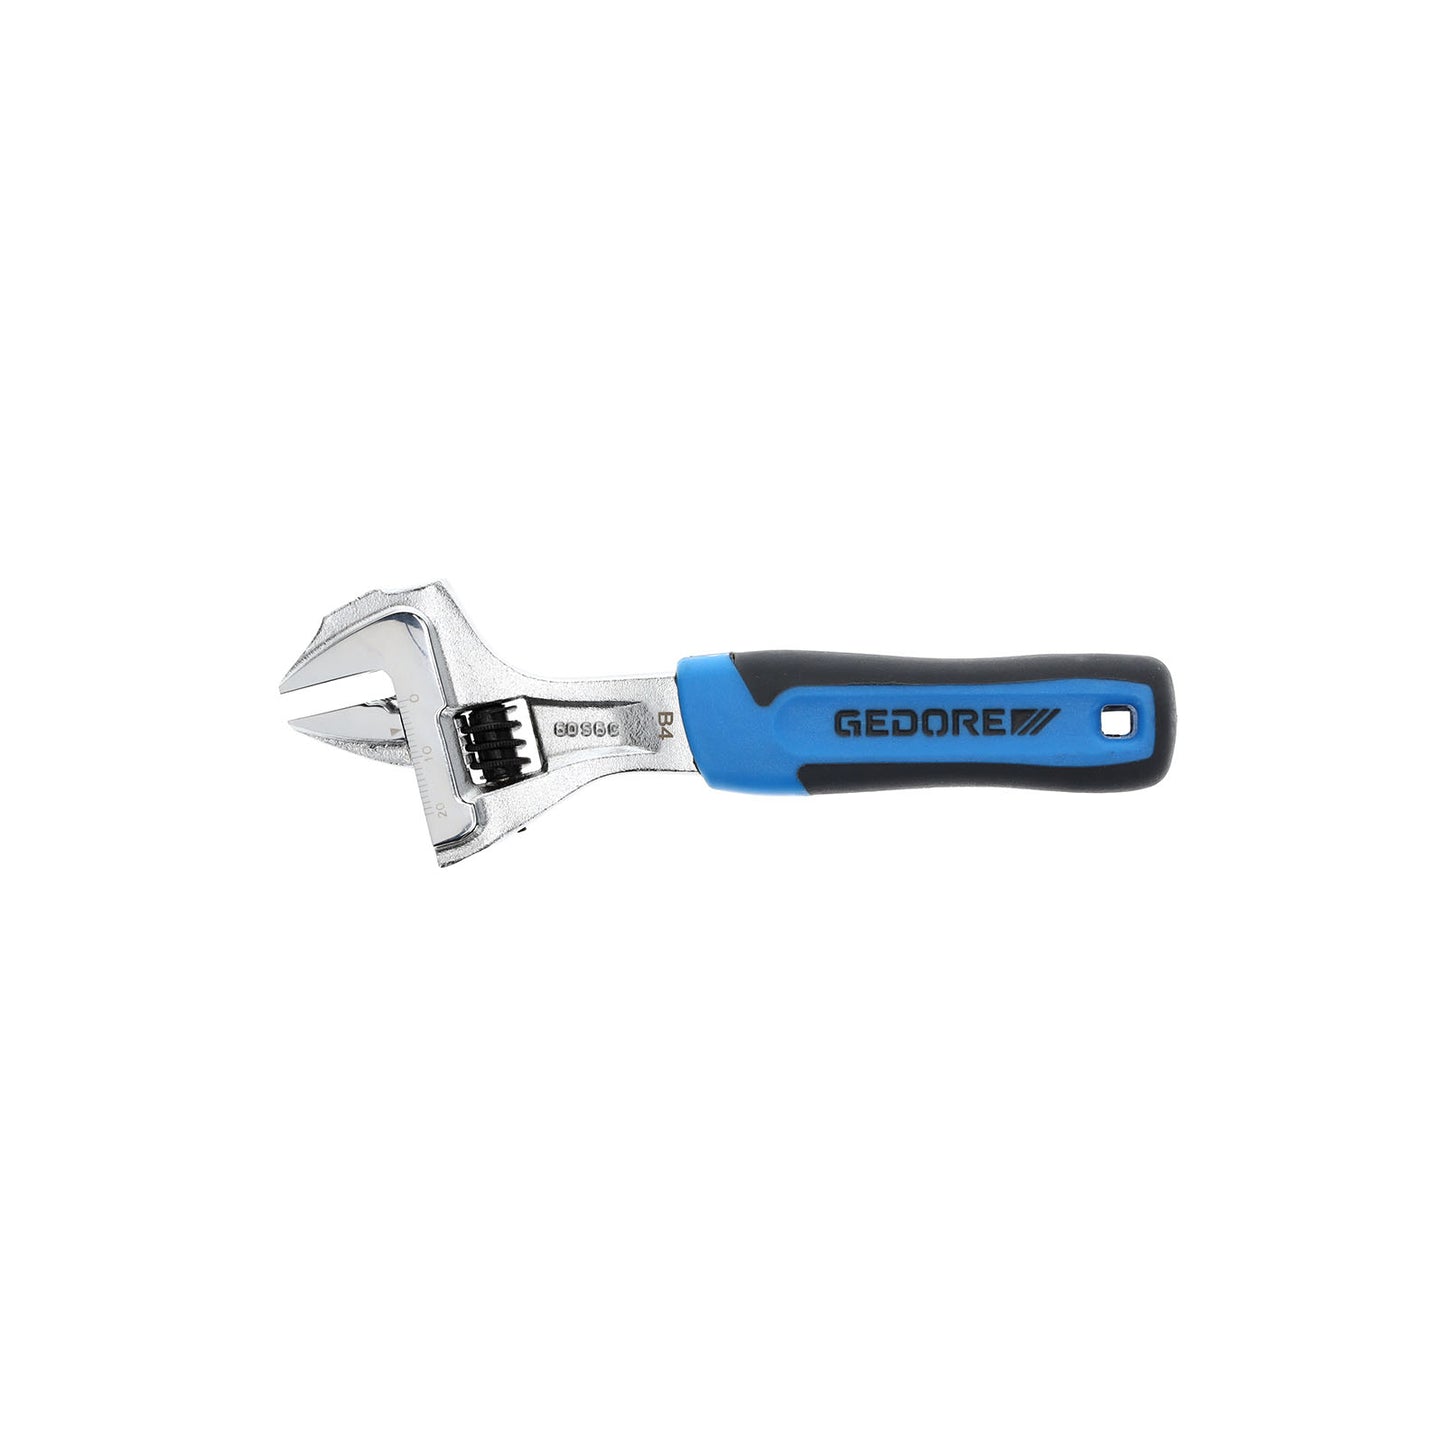 GEDORE 60 S 6 JC - Chrome Adjustable Wrench, 6" (2668858)